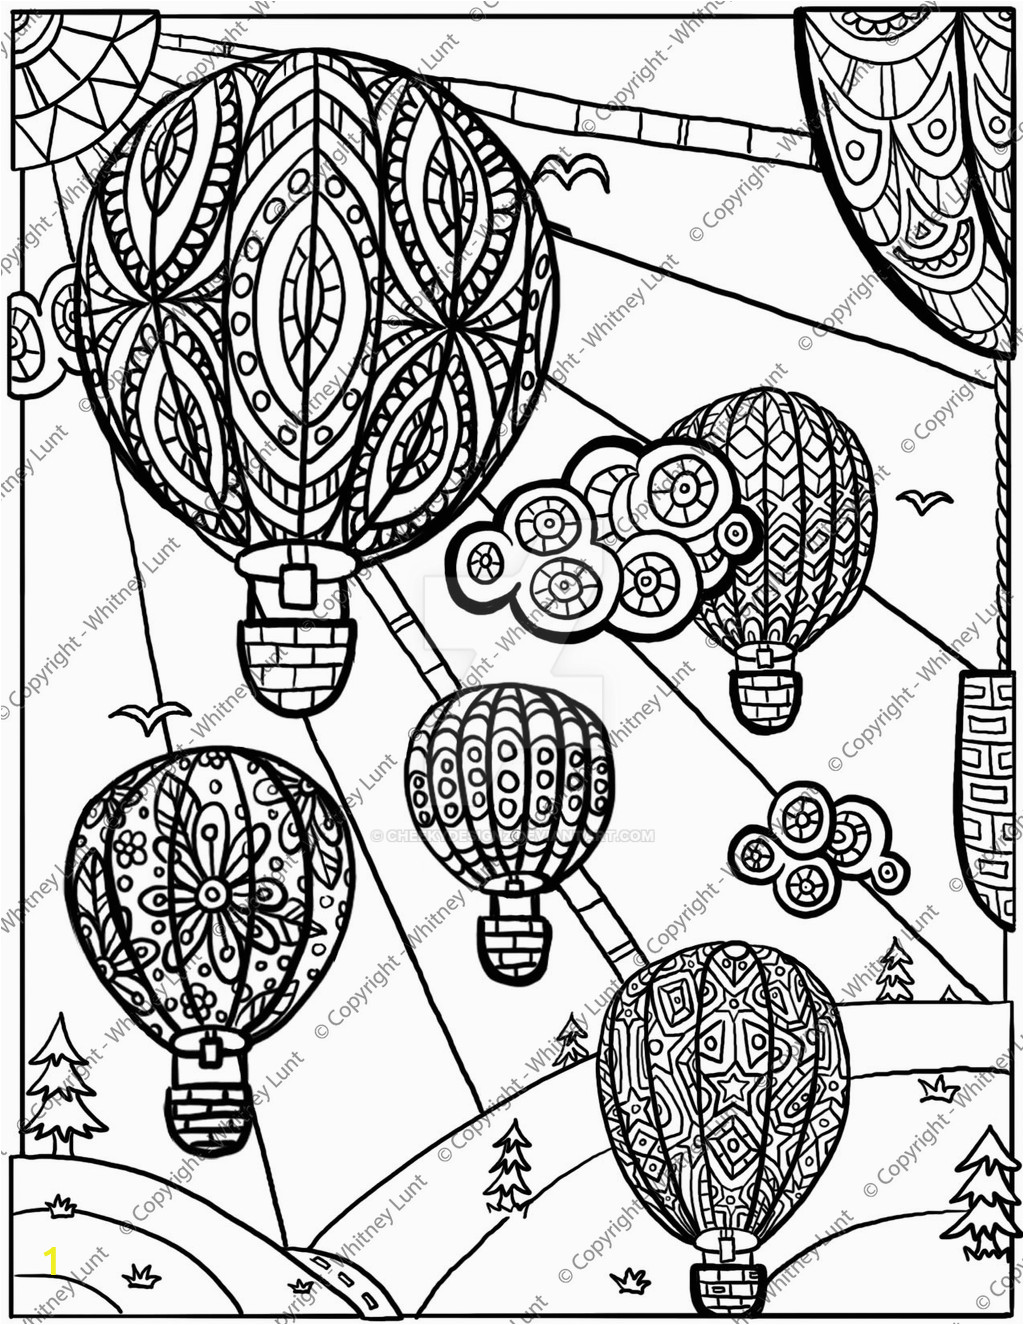 Hot Air Balloon Coloring Page for Adults Hot Air Balloon Coloring Page by Cheekydesignz On Deviantart